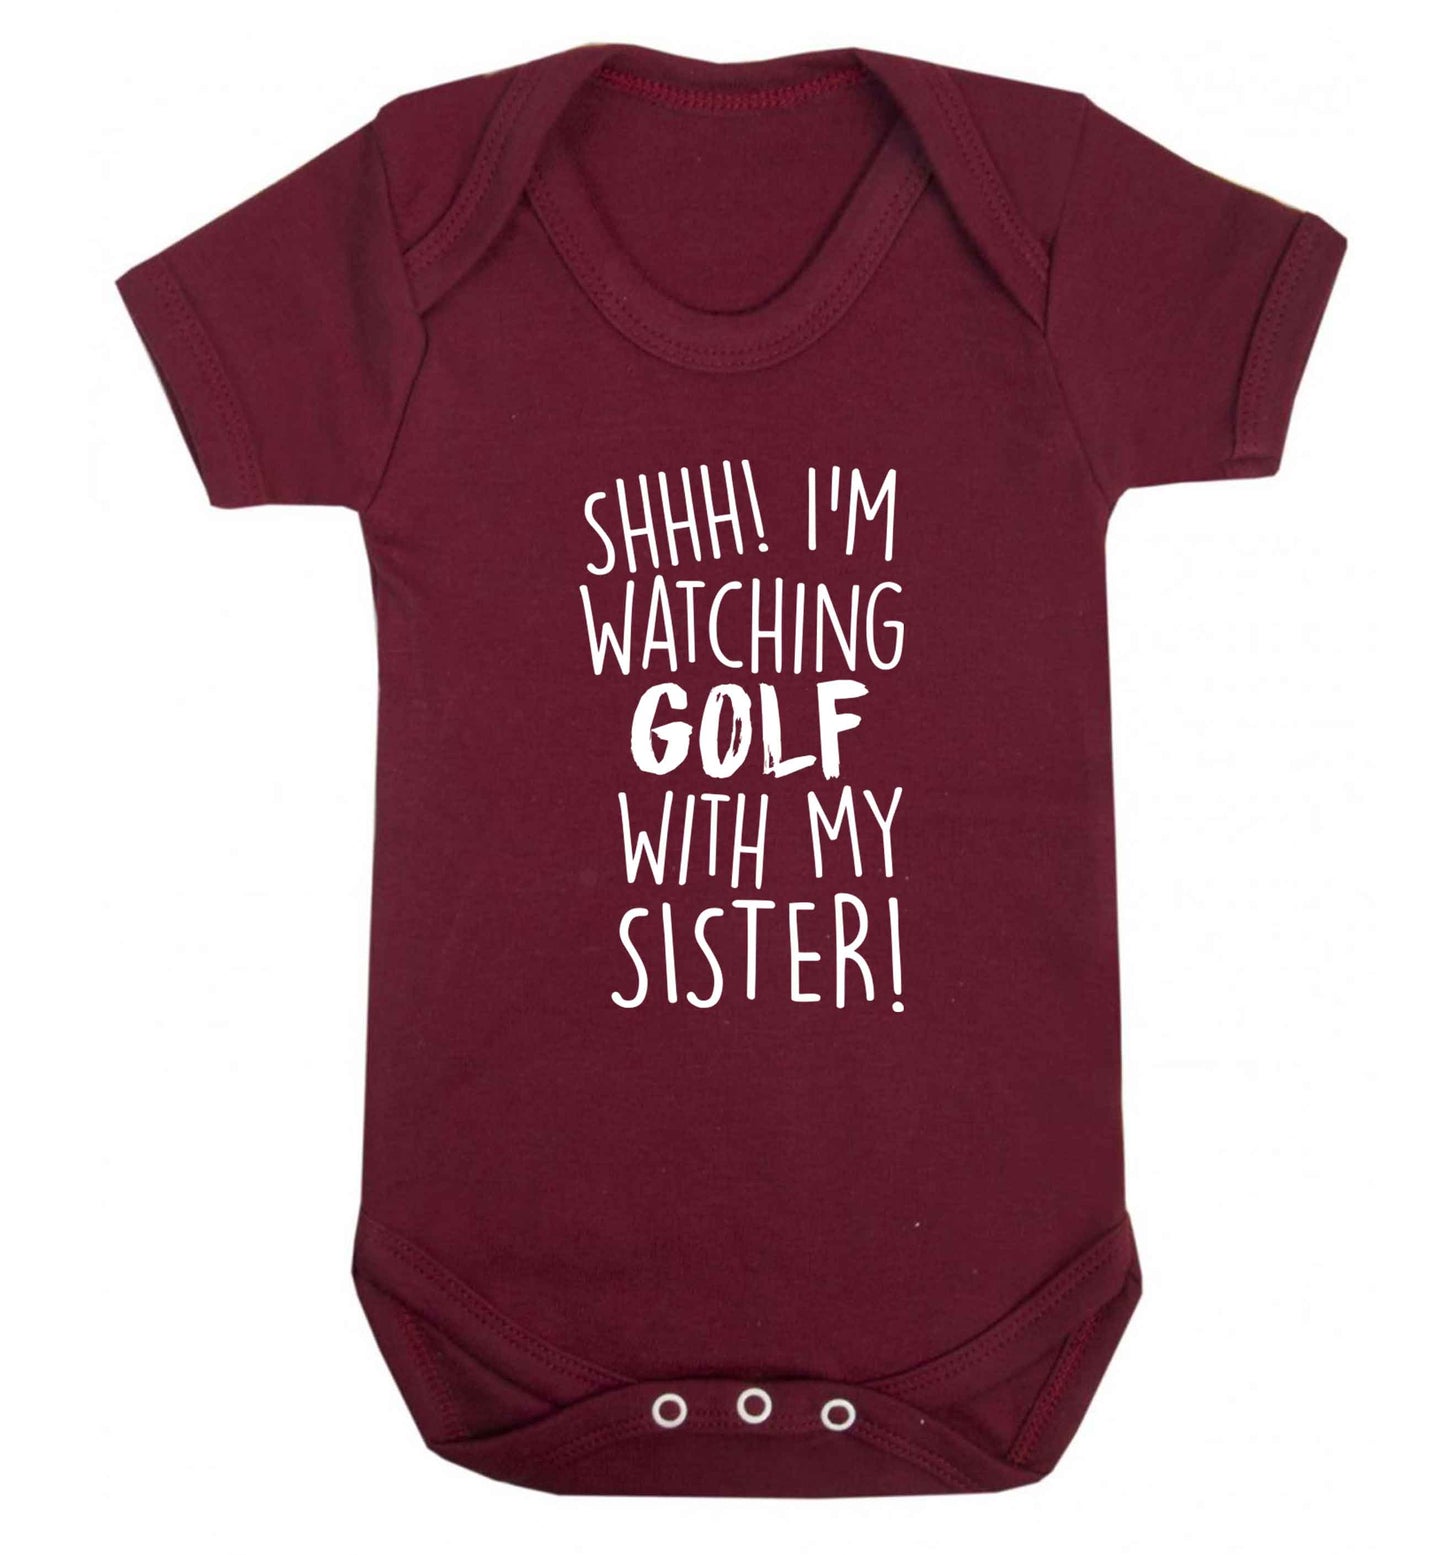 Shh I'm watching golf with my sister Baby Vest maroon 18-24 months